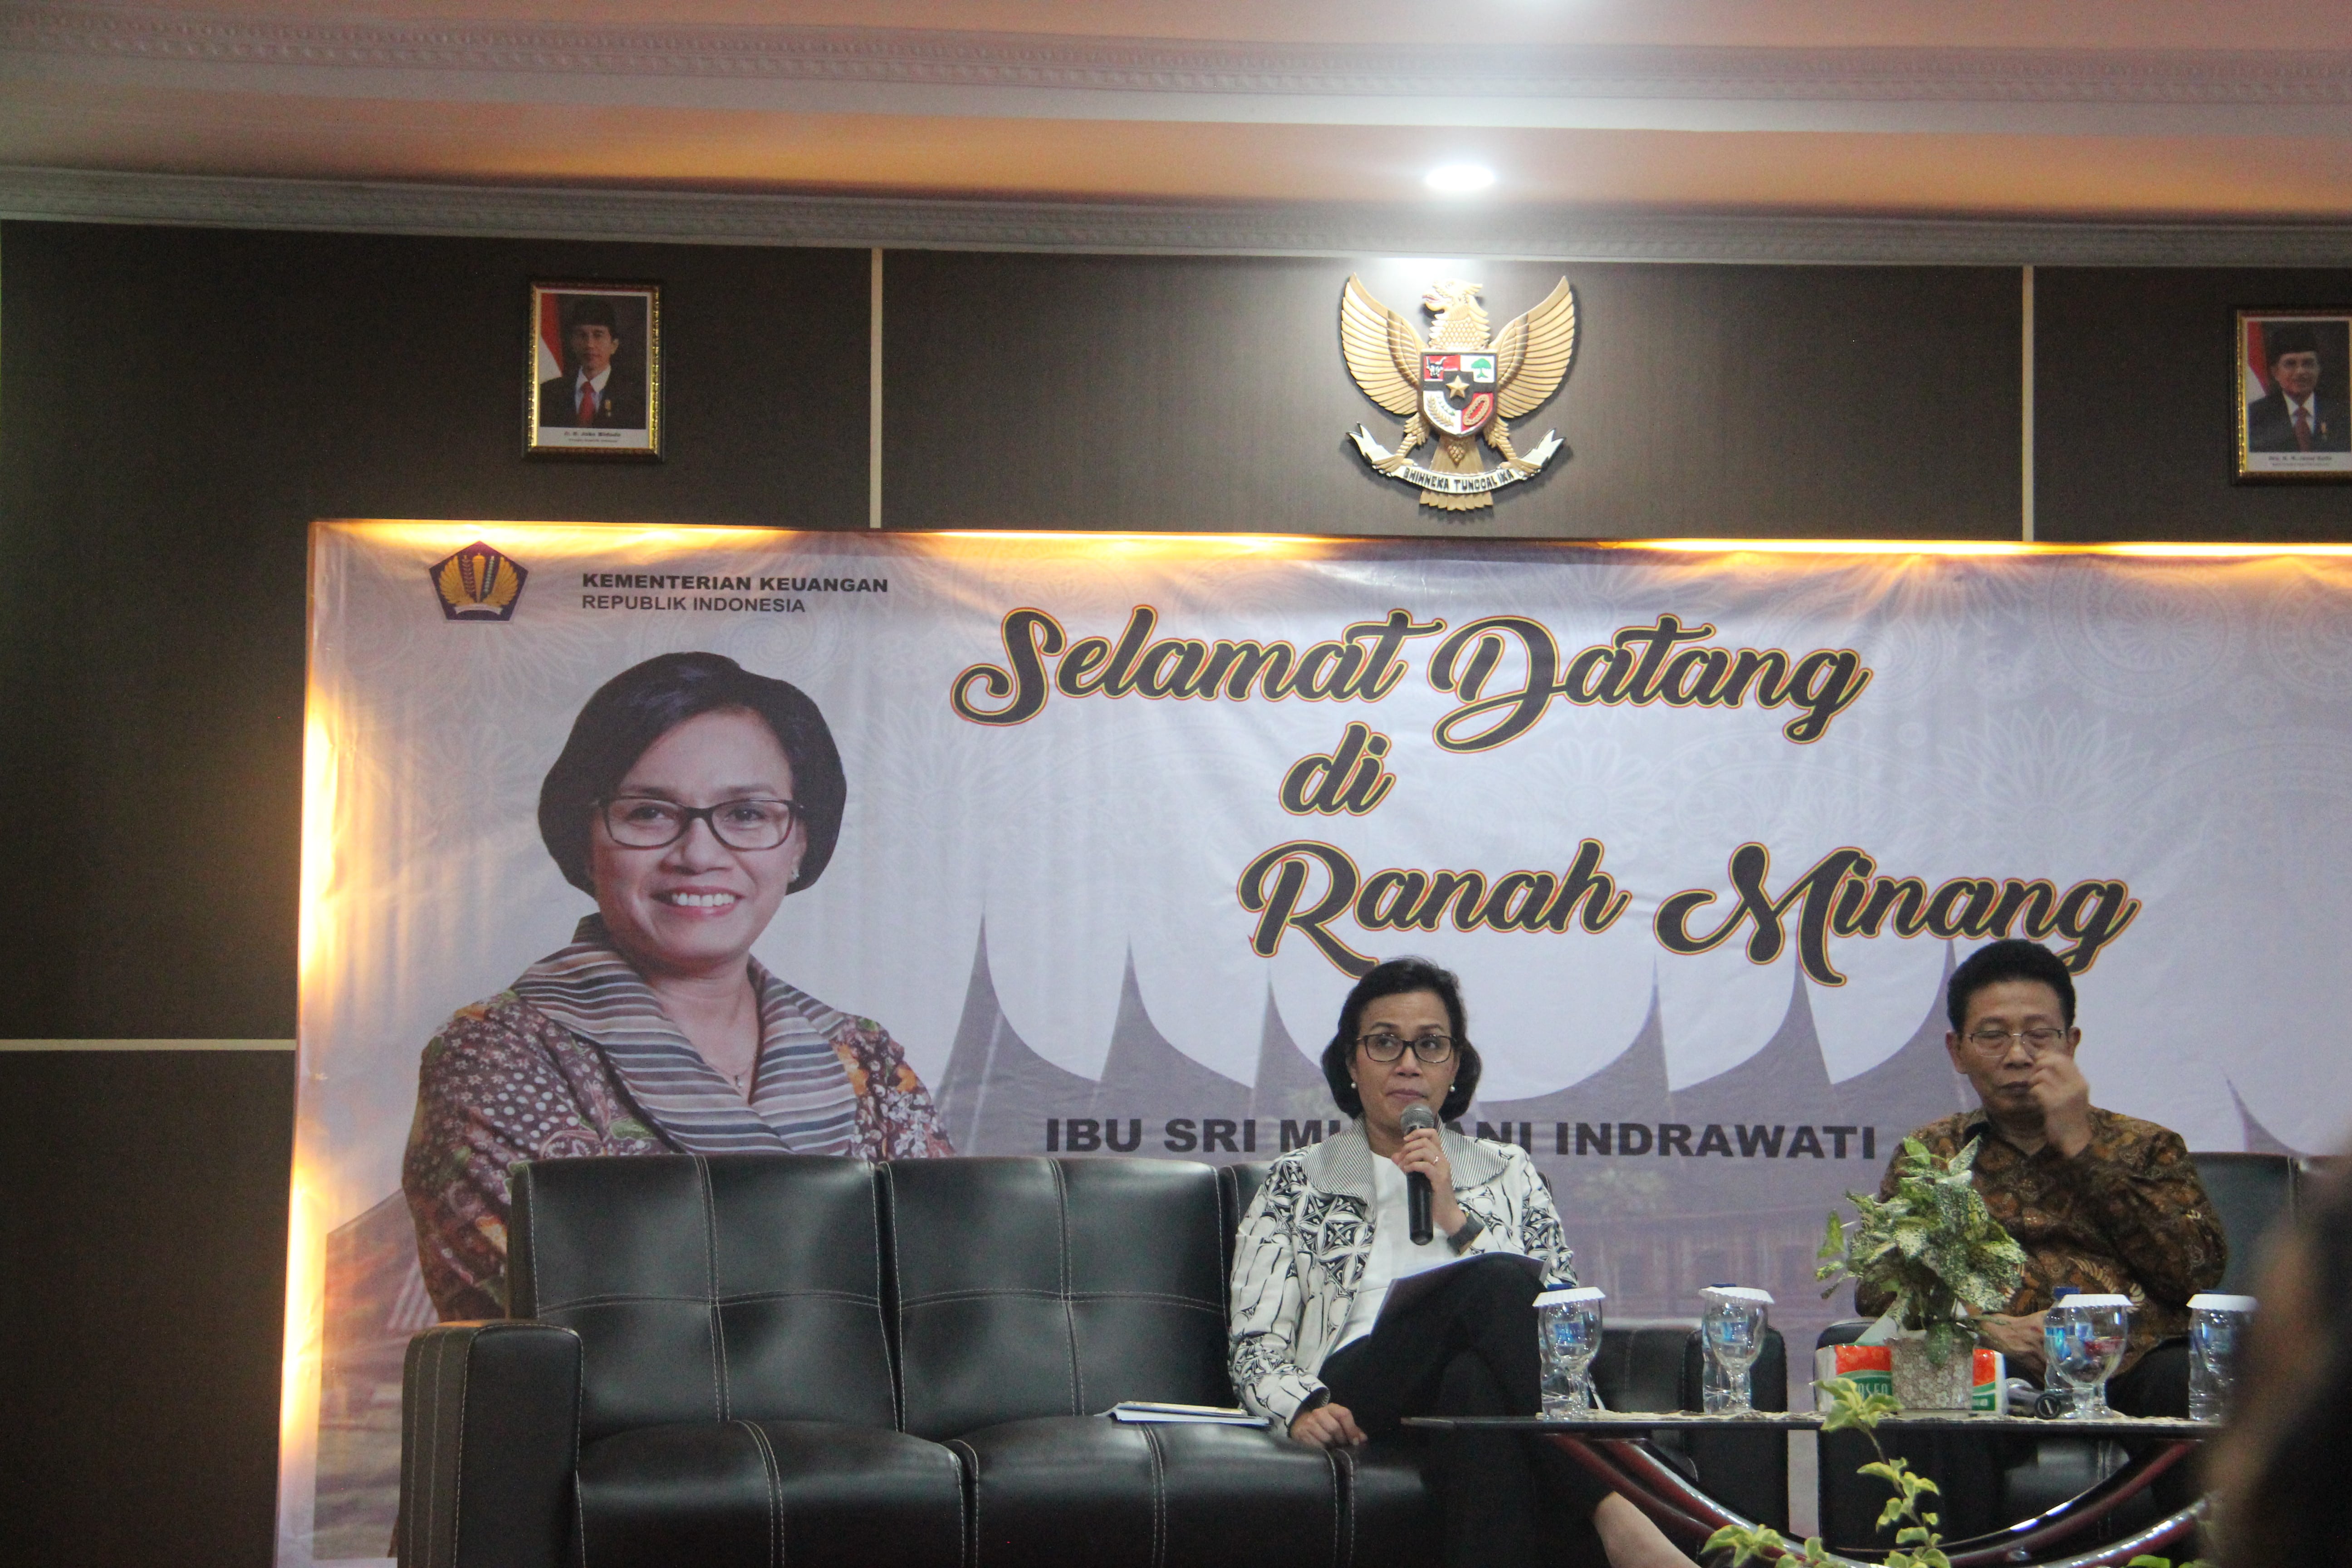 Sri Mulyani: Space is Also Valuable